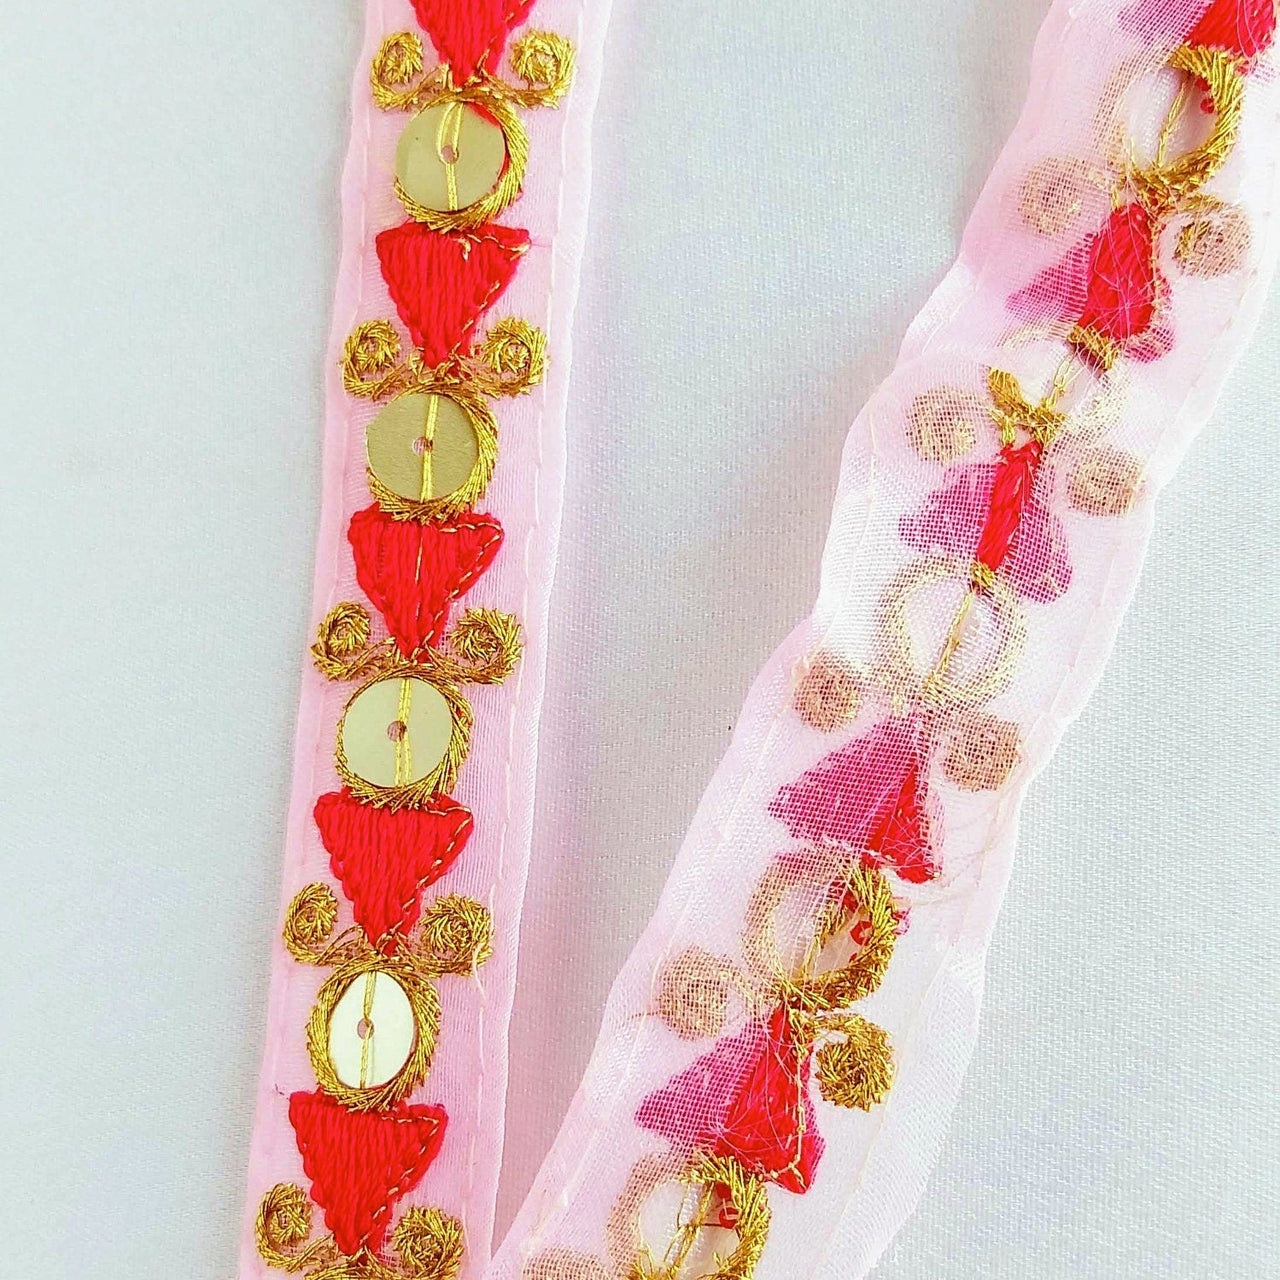 Pink Tissue Fabric Trim with Red & Gold Embroidery With Gold Sequins, , Lace Trim By 2 Yards Indian Decorative Trim